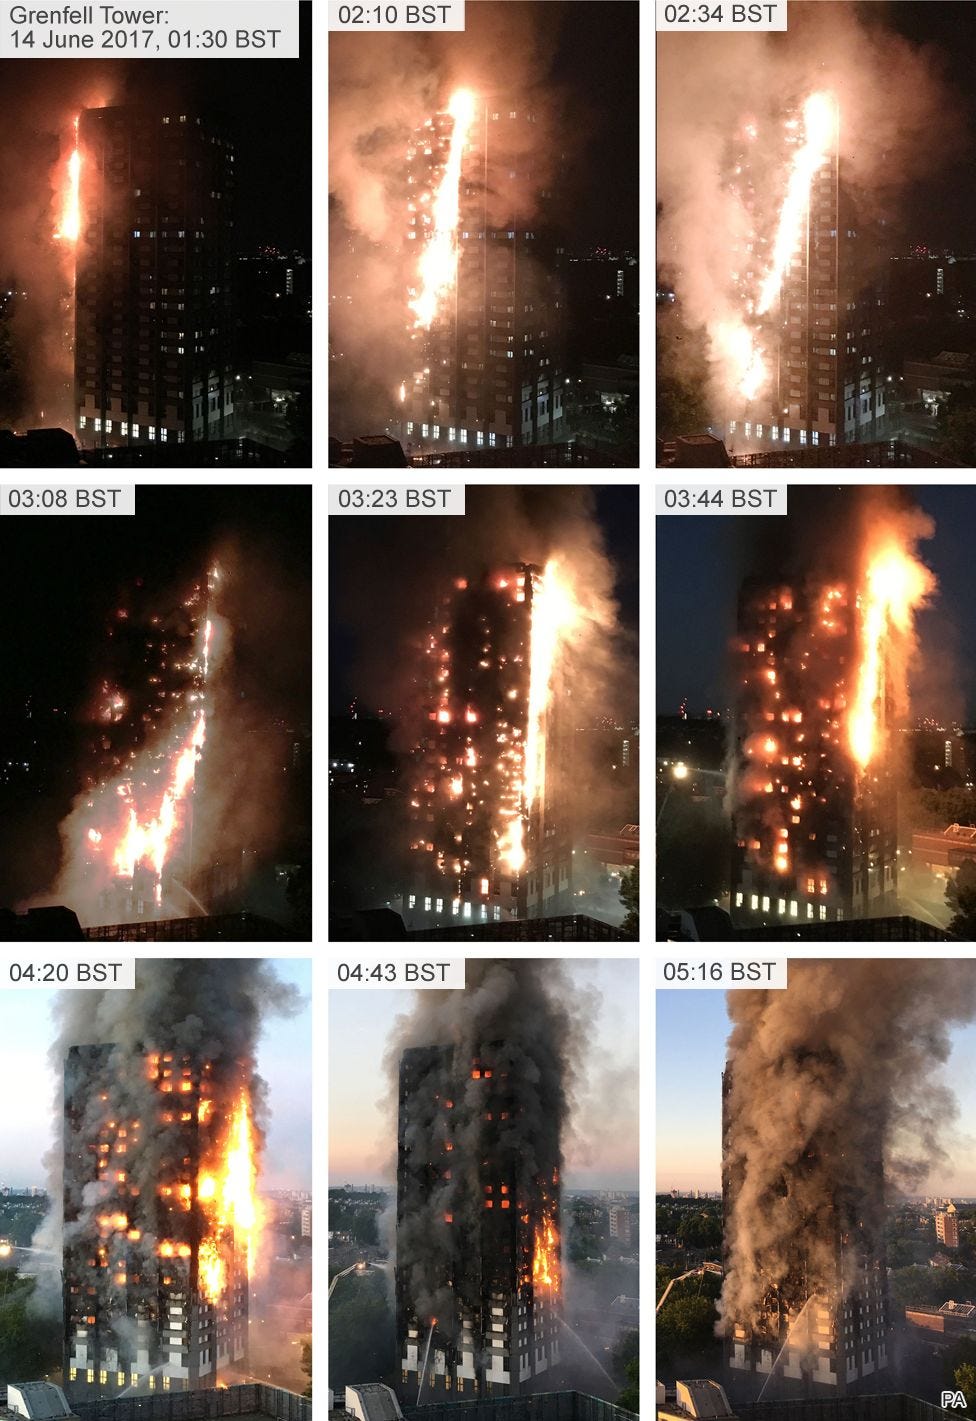 Progression of the fire around Grenfell Tower